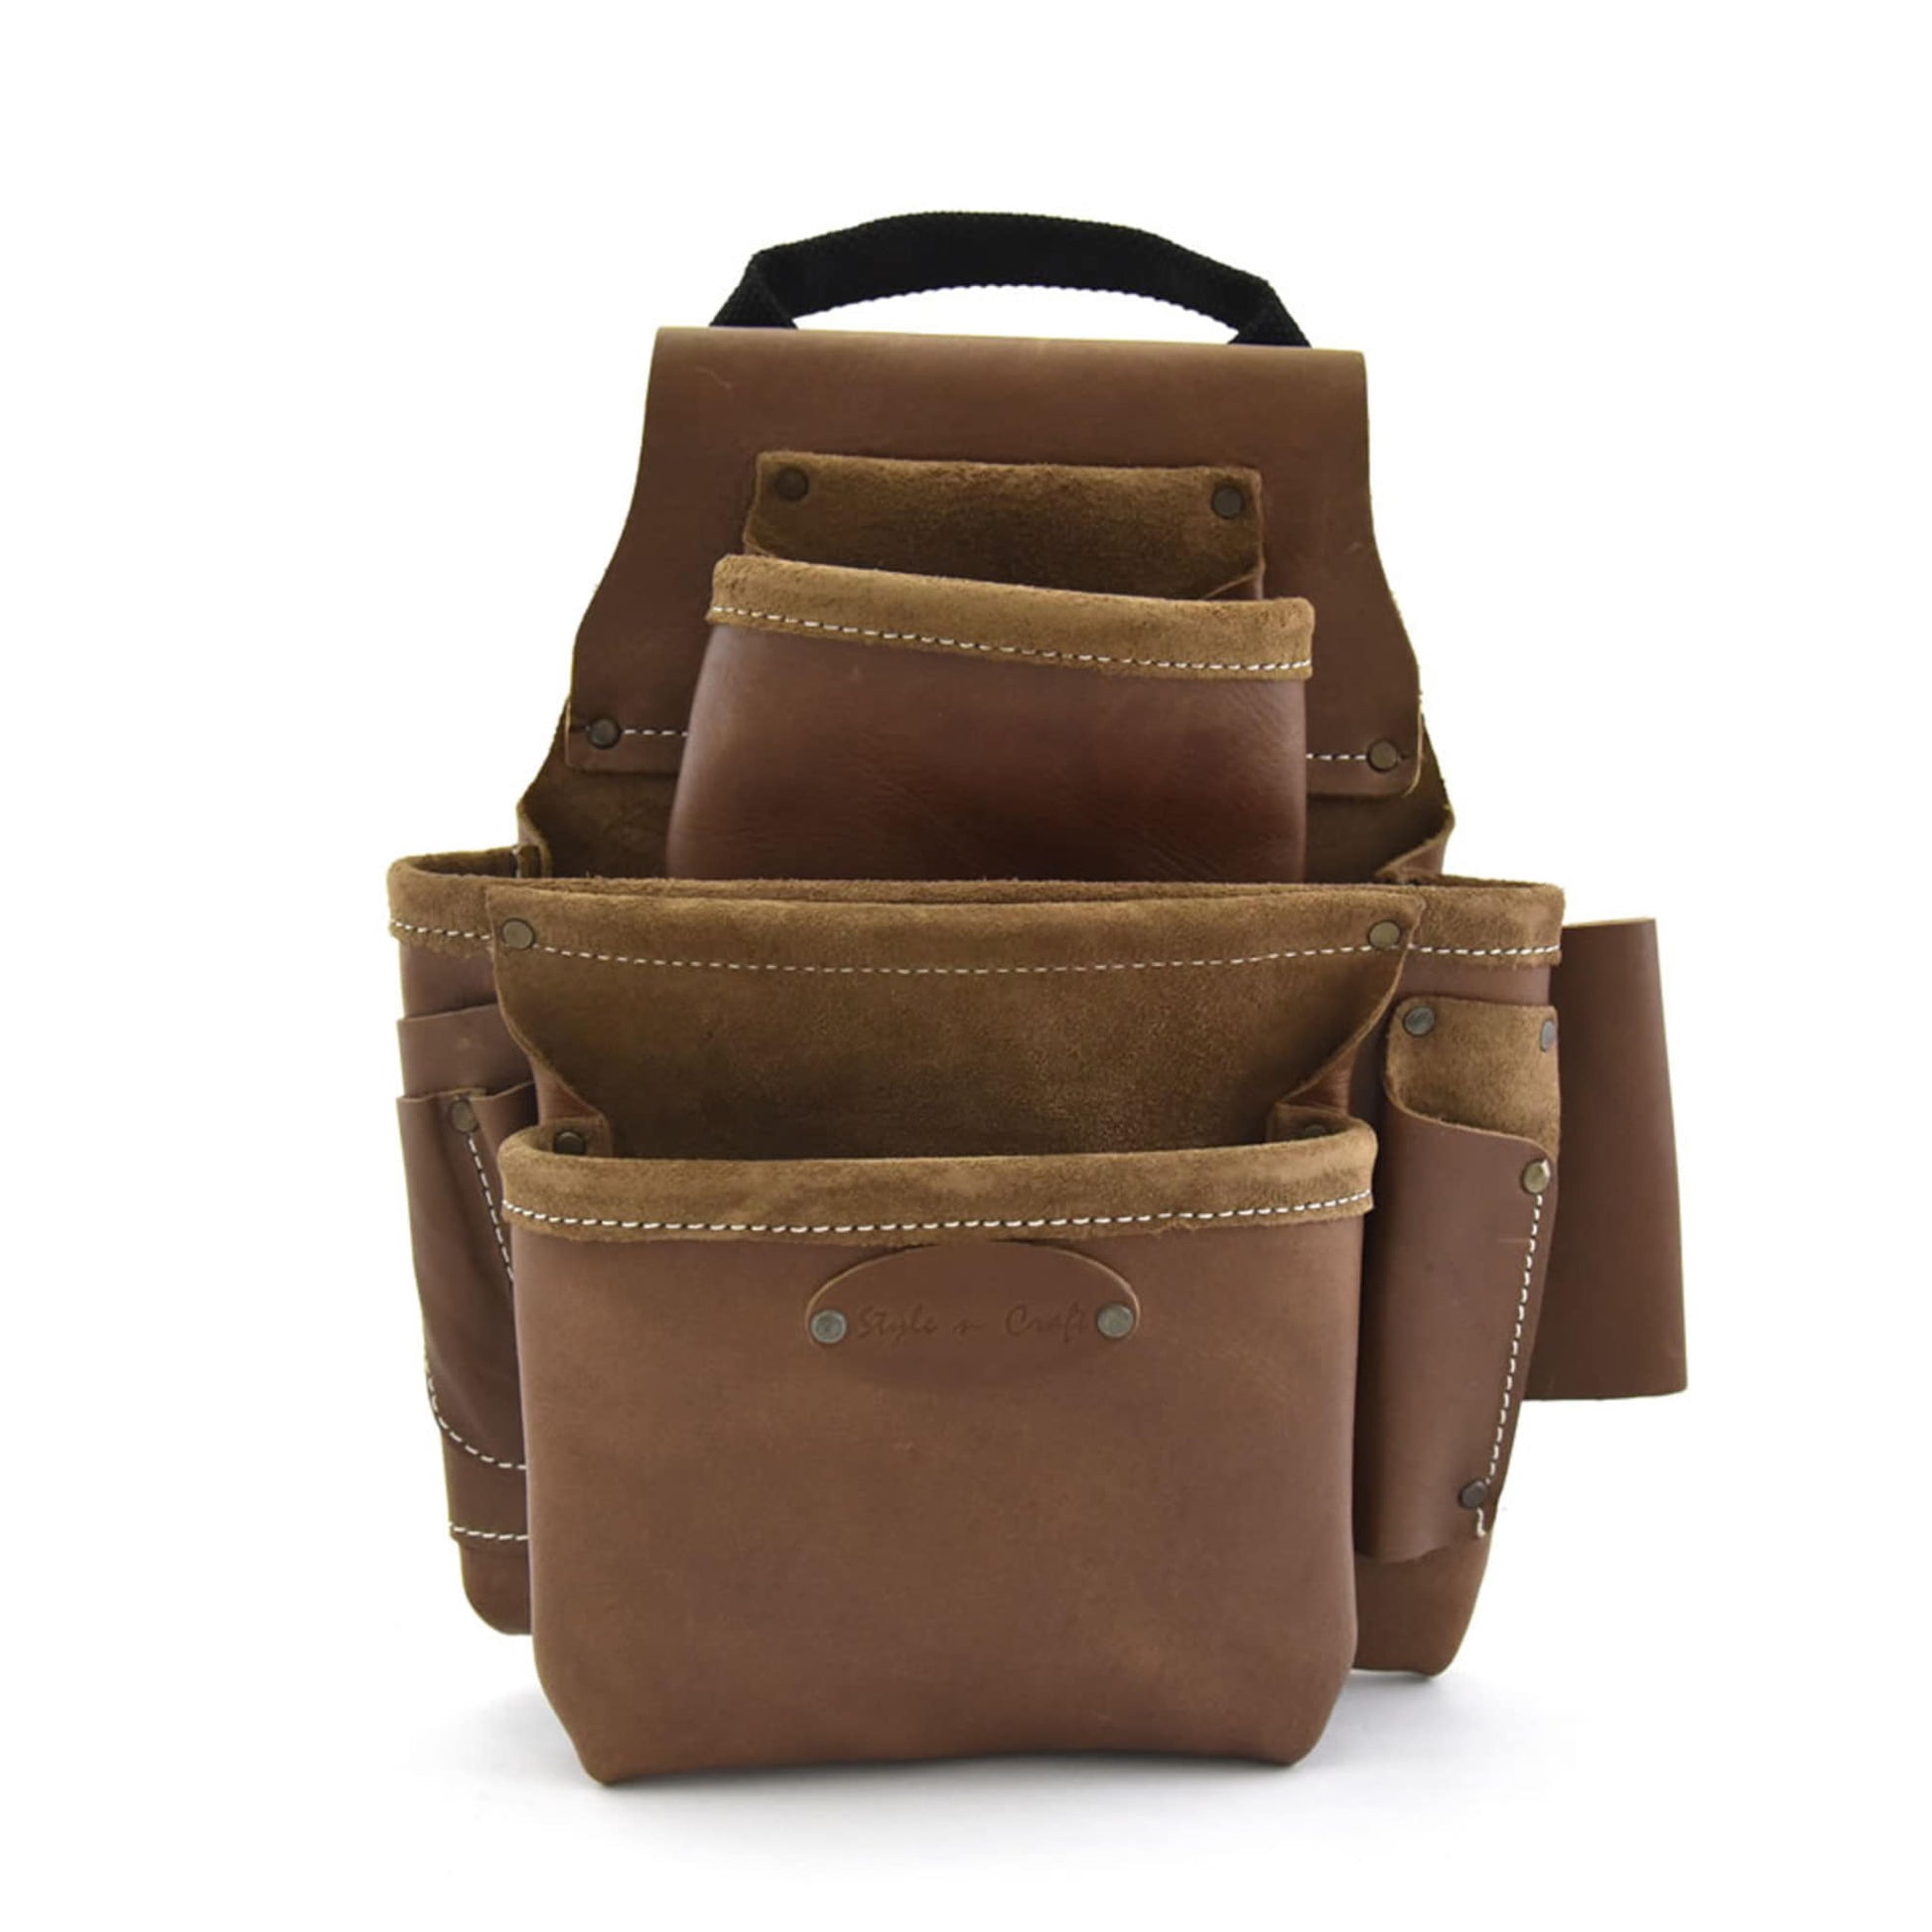 Style n Craft 98436 - 8 Pocket Framer's Nail and Tool Pouch in Full Grain Leather in Dark Tan Color - Front view showing the front pouch , pencil pockets, prybar &  combination square holder along with a smaller top pocket and easy carry handle on the top of the pouch